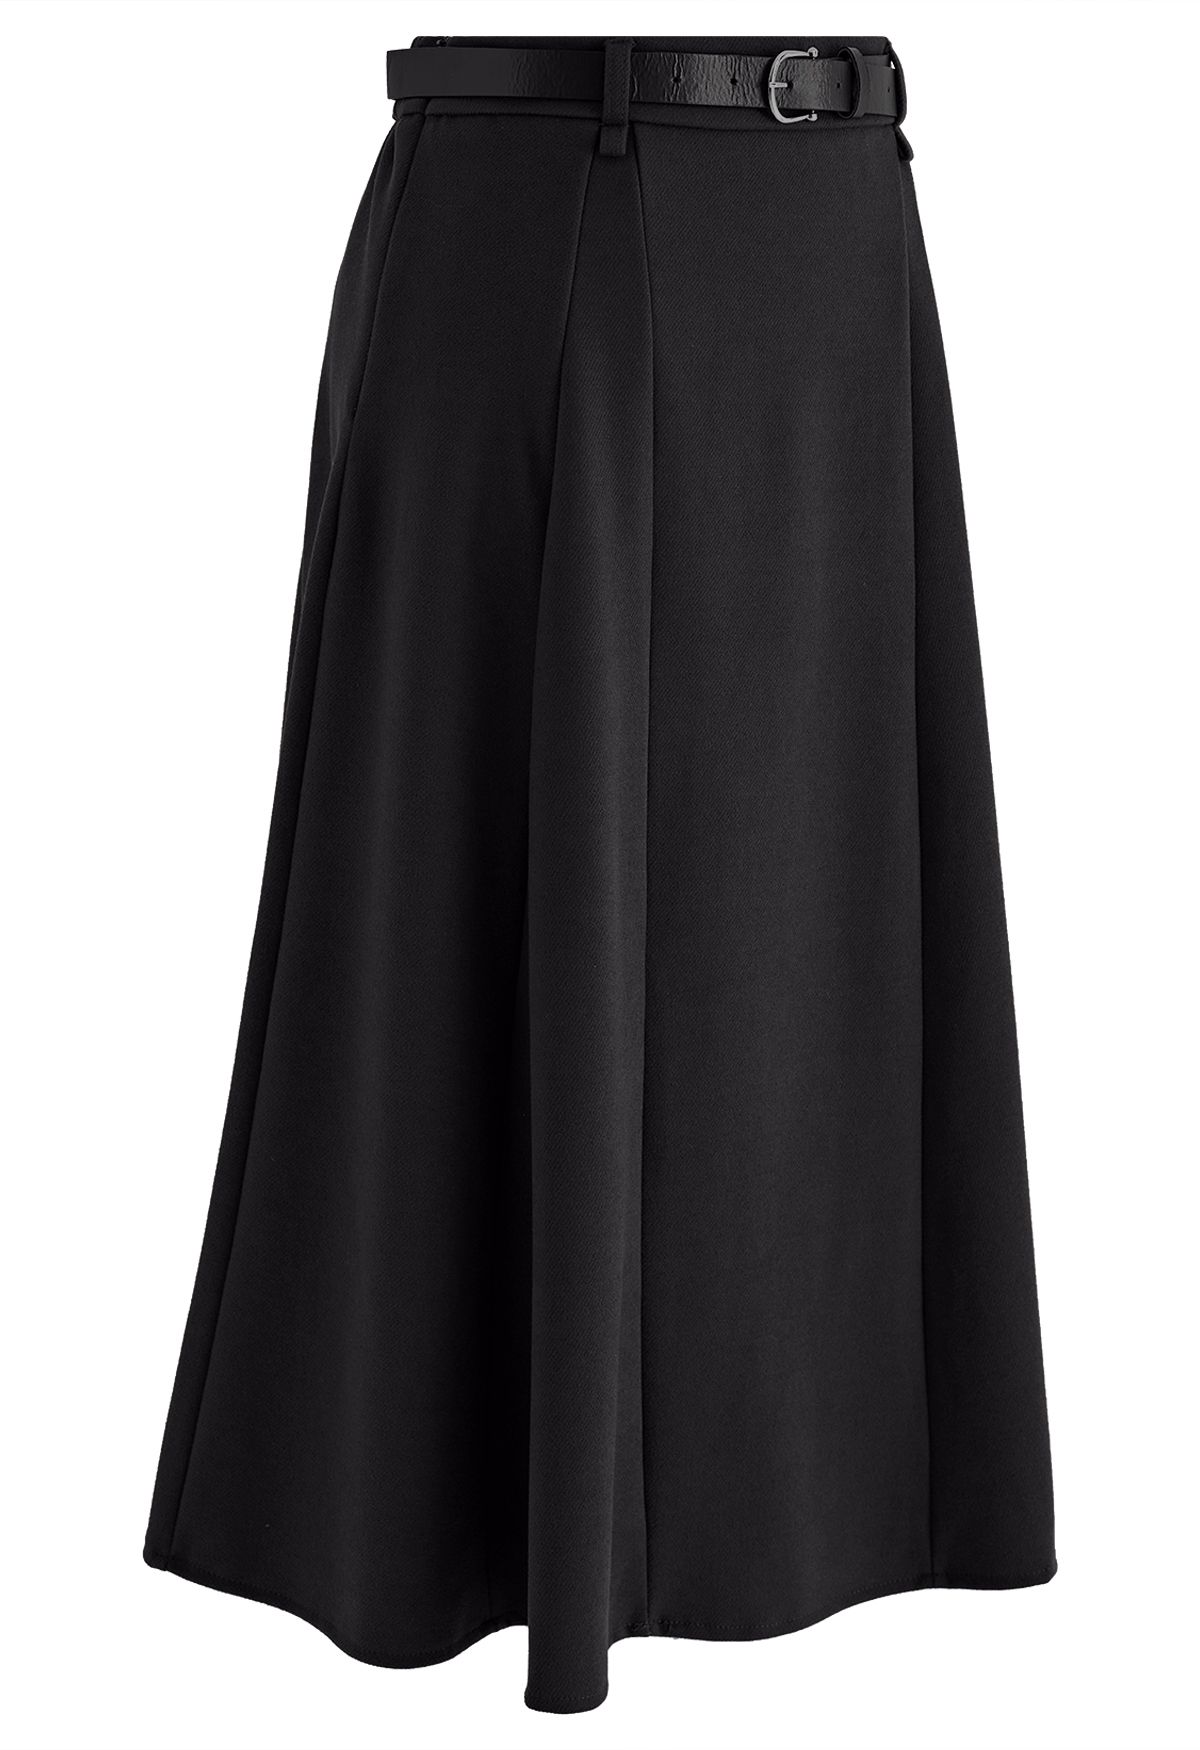 Solid Color Belted Flare Midi Skirt in Black - Retro, Indie and Unique ...